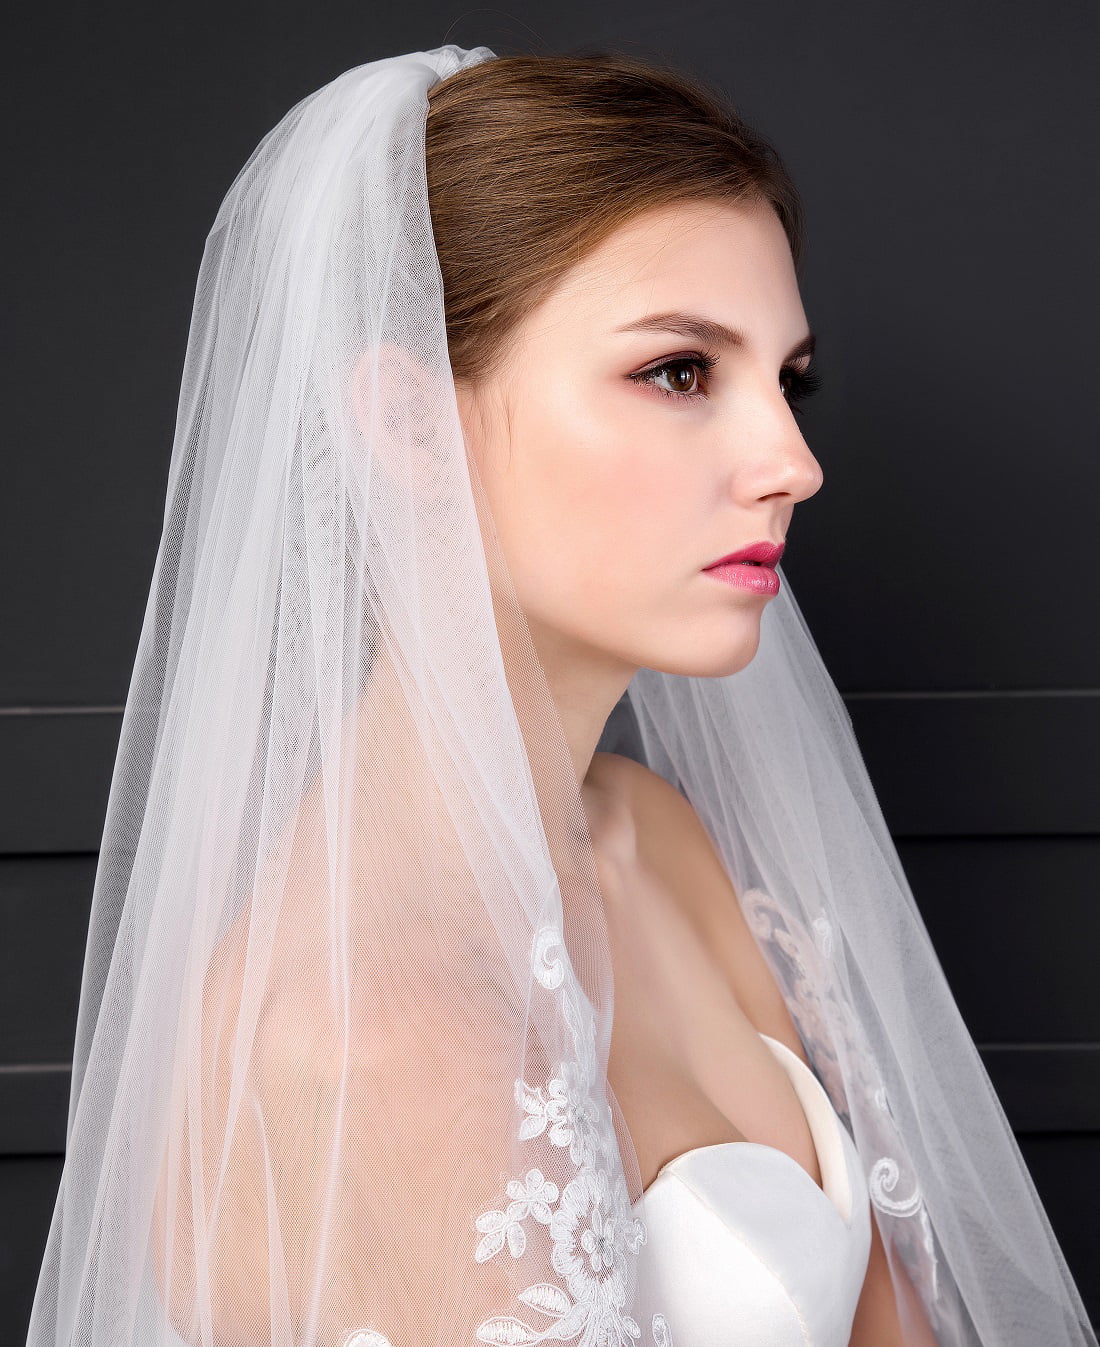 EllieWely 2 Tier Fingertip Length 90 cm(35 inch) Lace Wedding Bridal Veil  With Metal Comb X33 